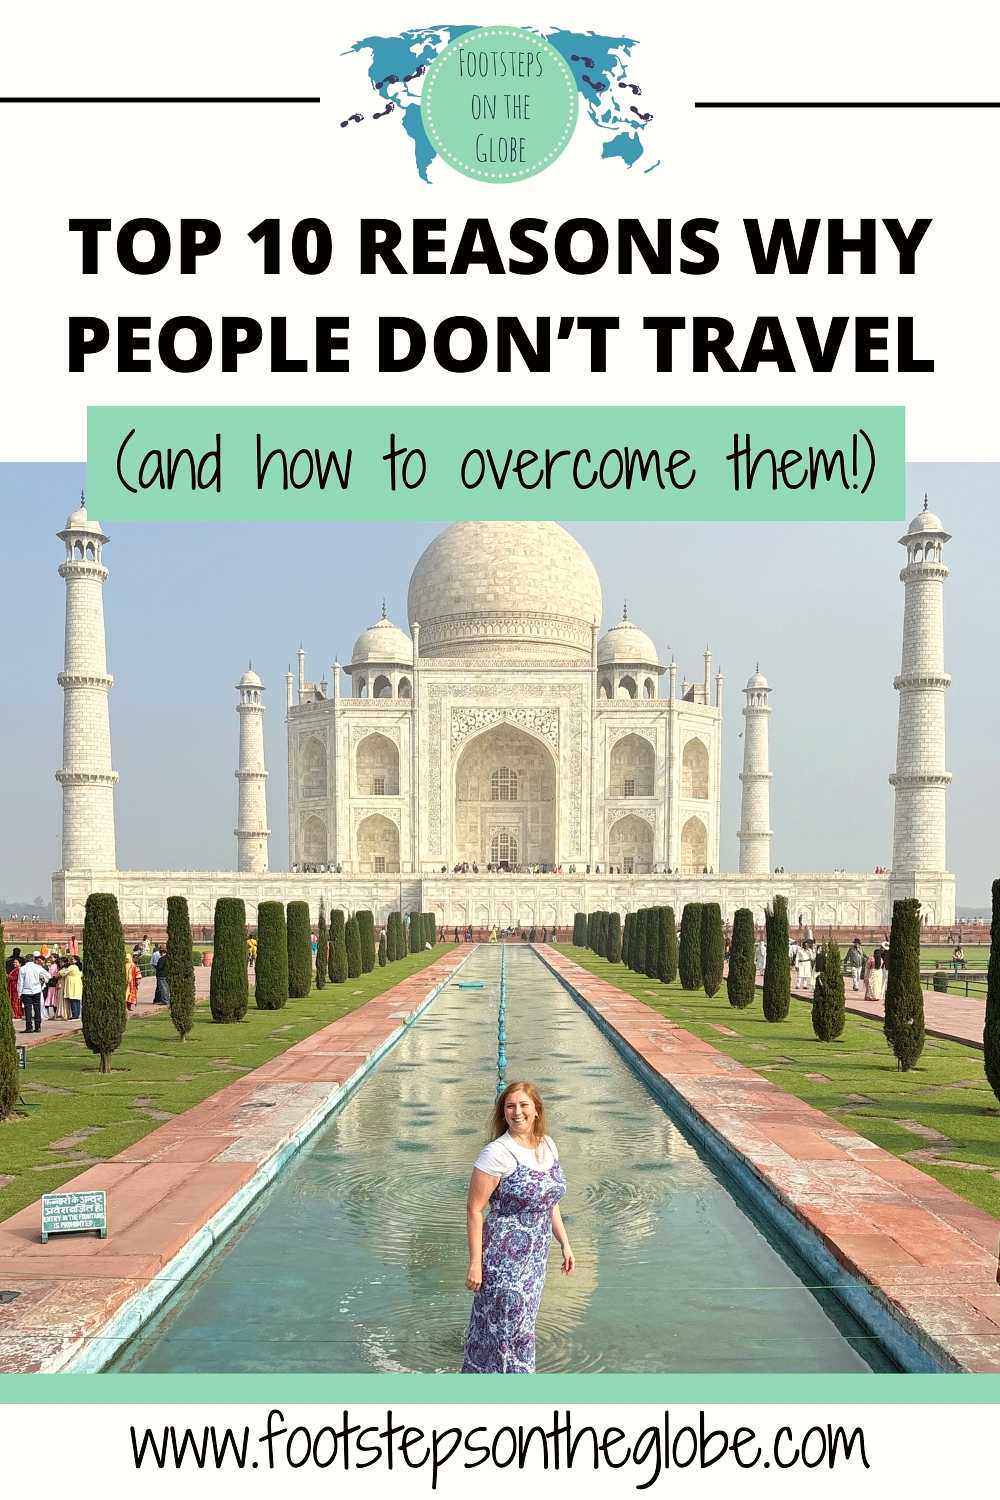 Pinterest image of Mel in front of the Taj Mahal in India with the text: "Top 10 reasons why people don't travel how to overcome them"